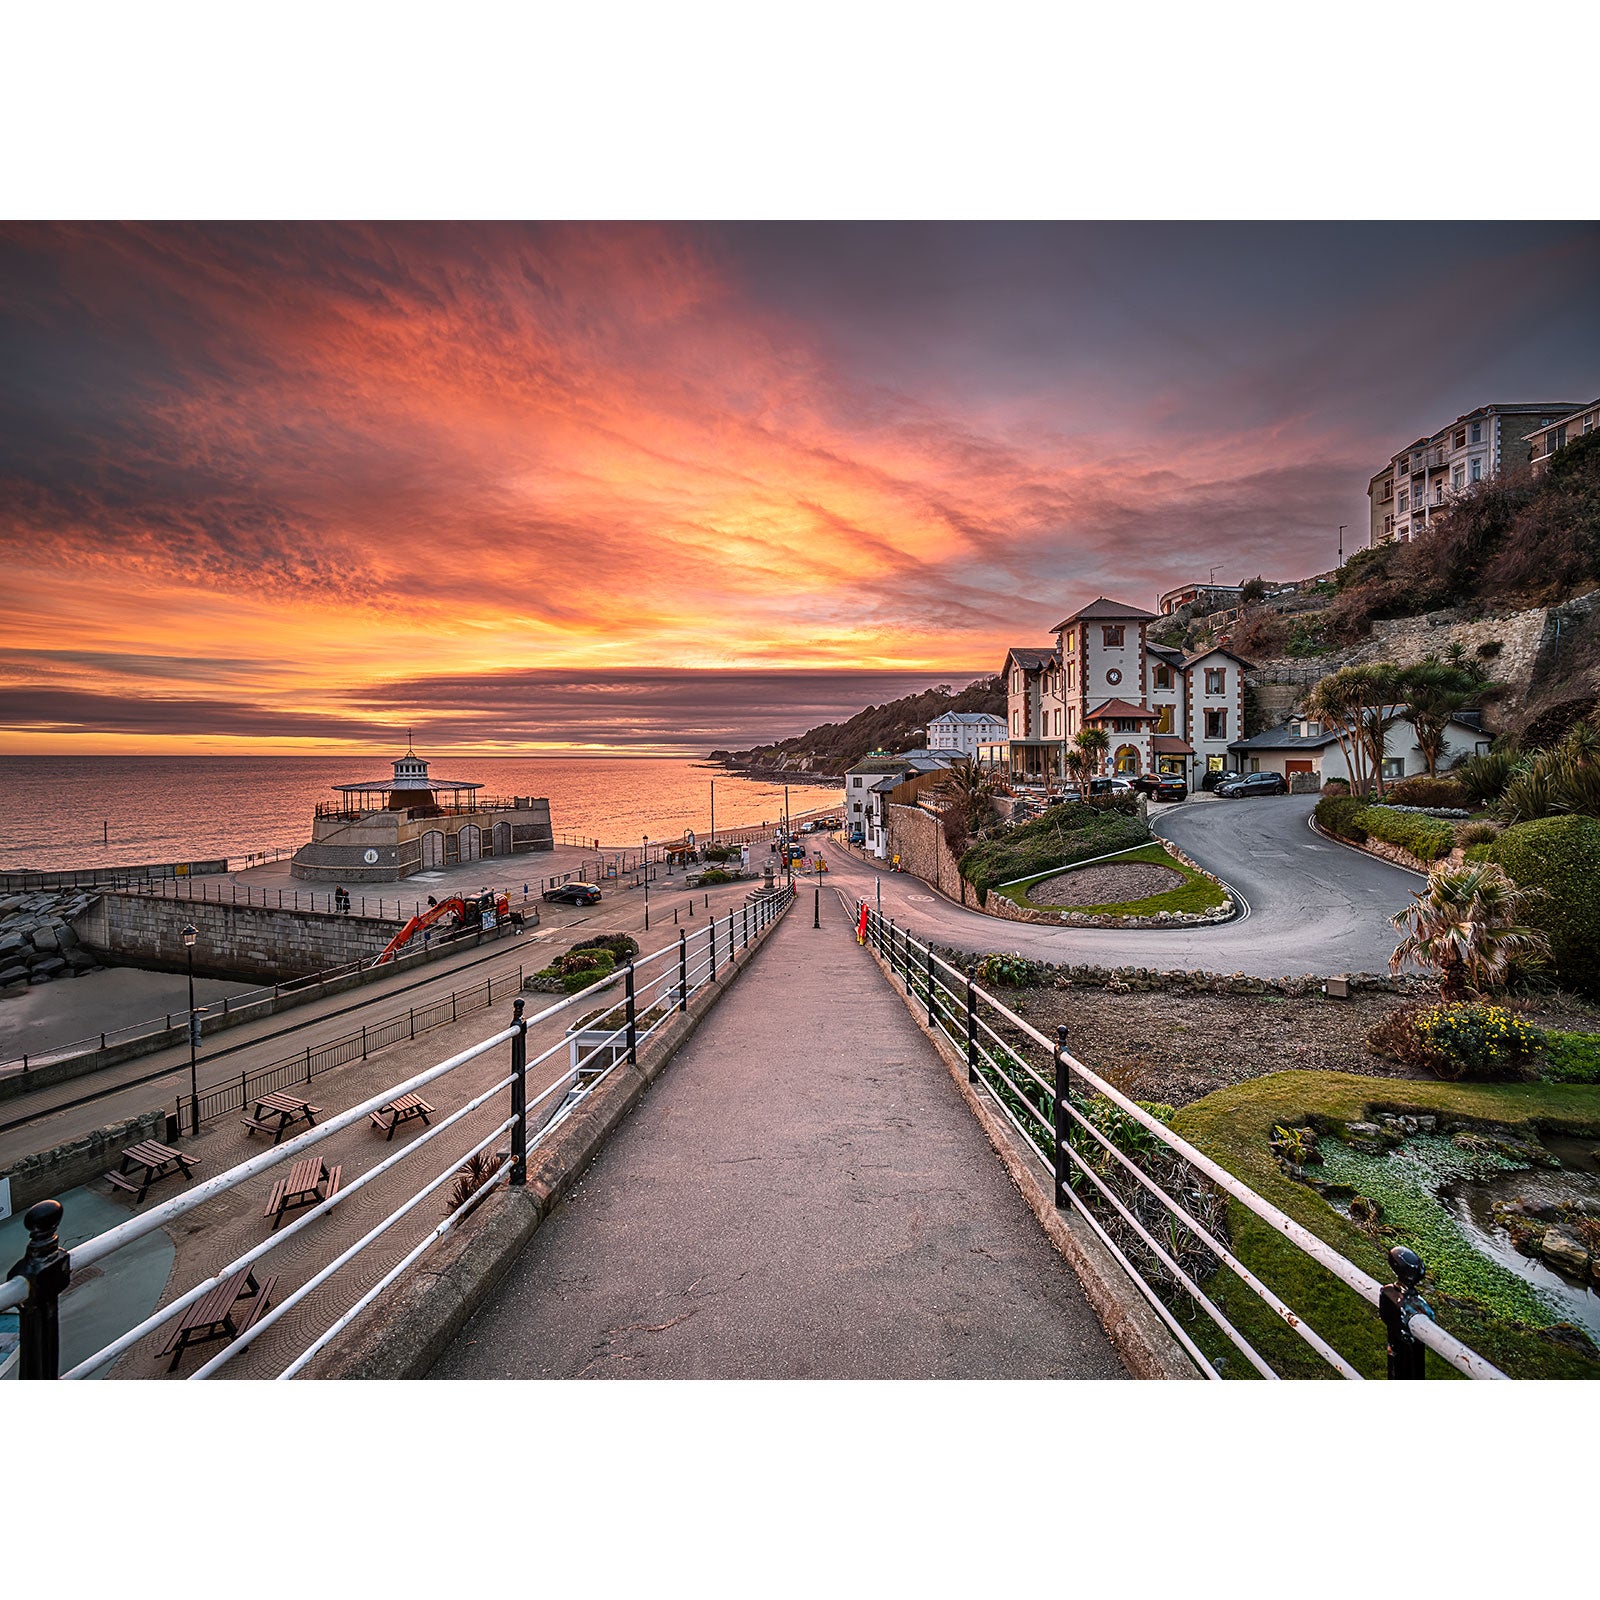 Sunset over a coastal promenade on the Isle of Wight with a dramatic sky, adjacent buildings, and a calm sea captured in Ventnor by Available Light Photography.